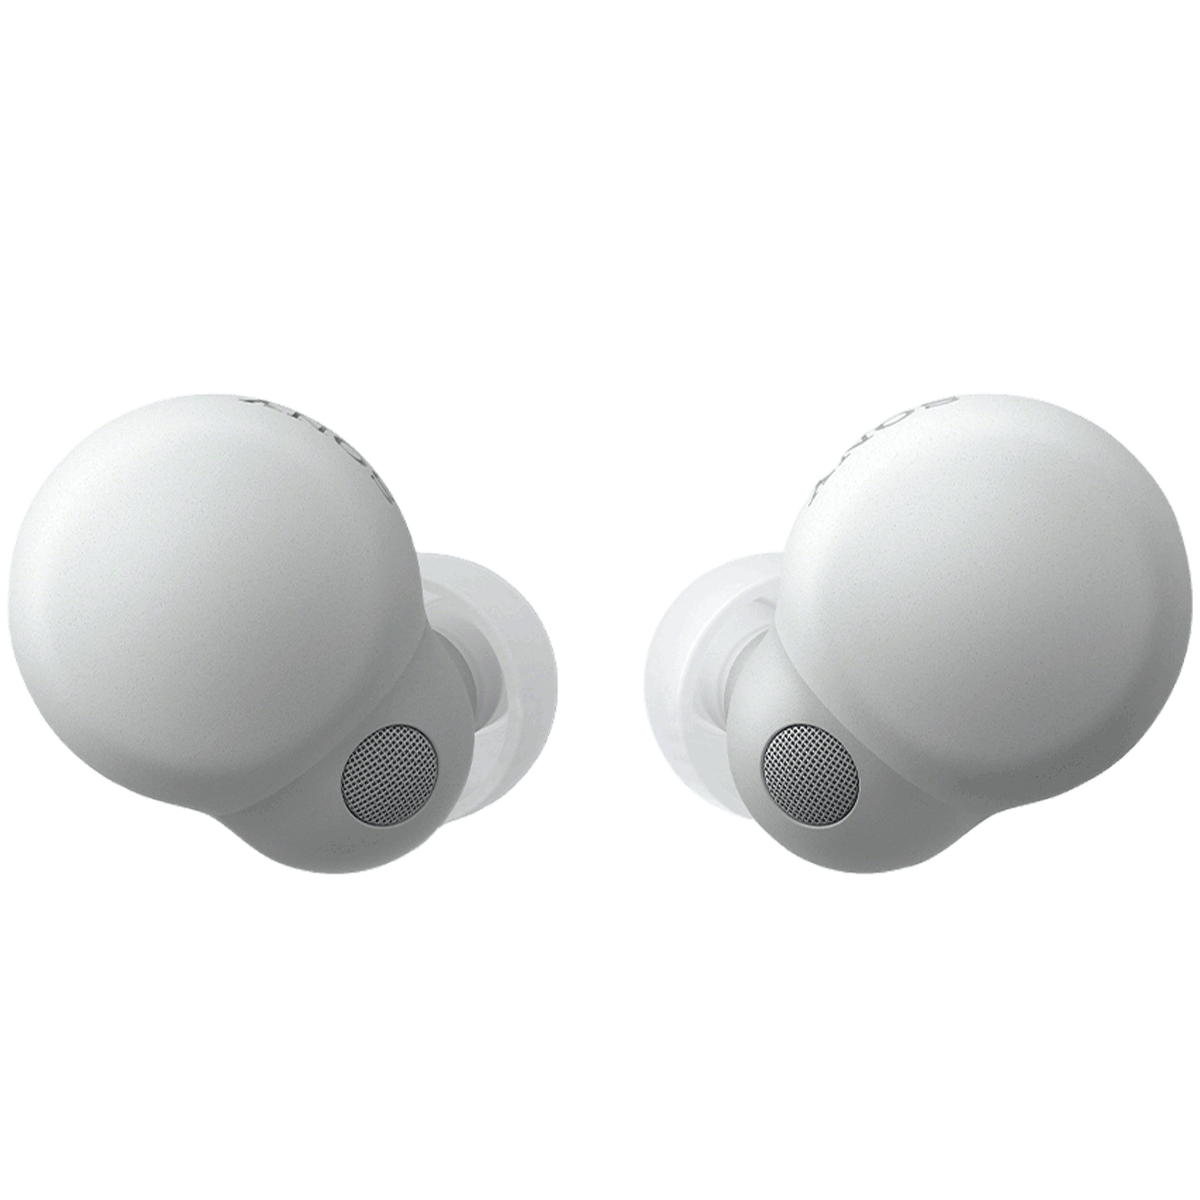 Sony Linkbud S truly wireless earbuds - white - two earbuds on showing microphones